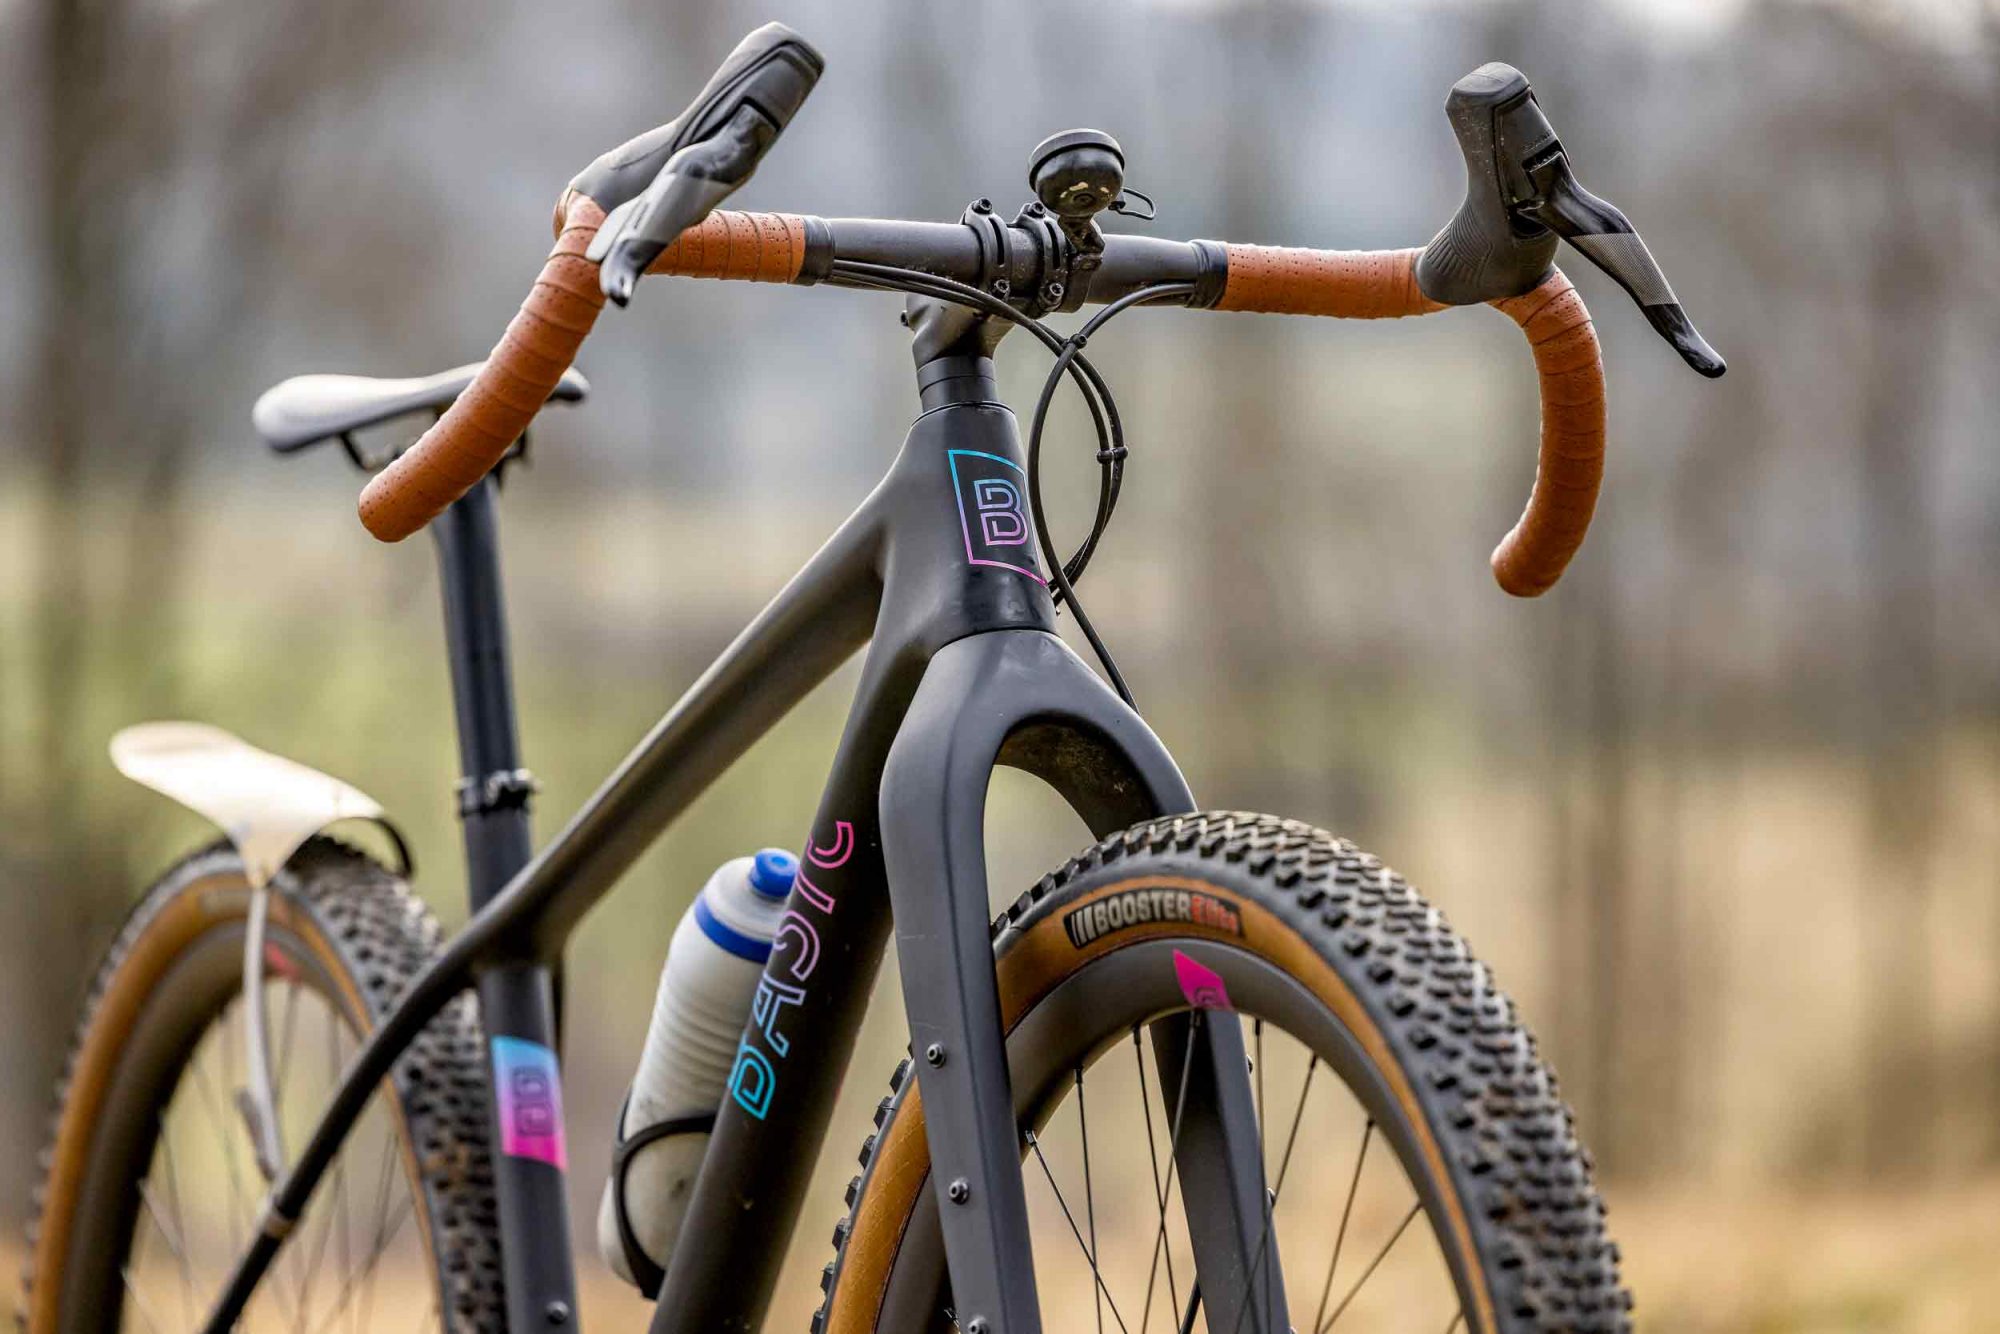 Visually, the open mould frame of the basic monster test bike makes a robust and high-quality impression. The "main culprit" for the somewhat beefy look is undoubtedly the voluminous fork, which offers impressive tyre clearance.